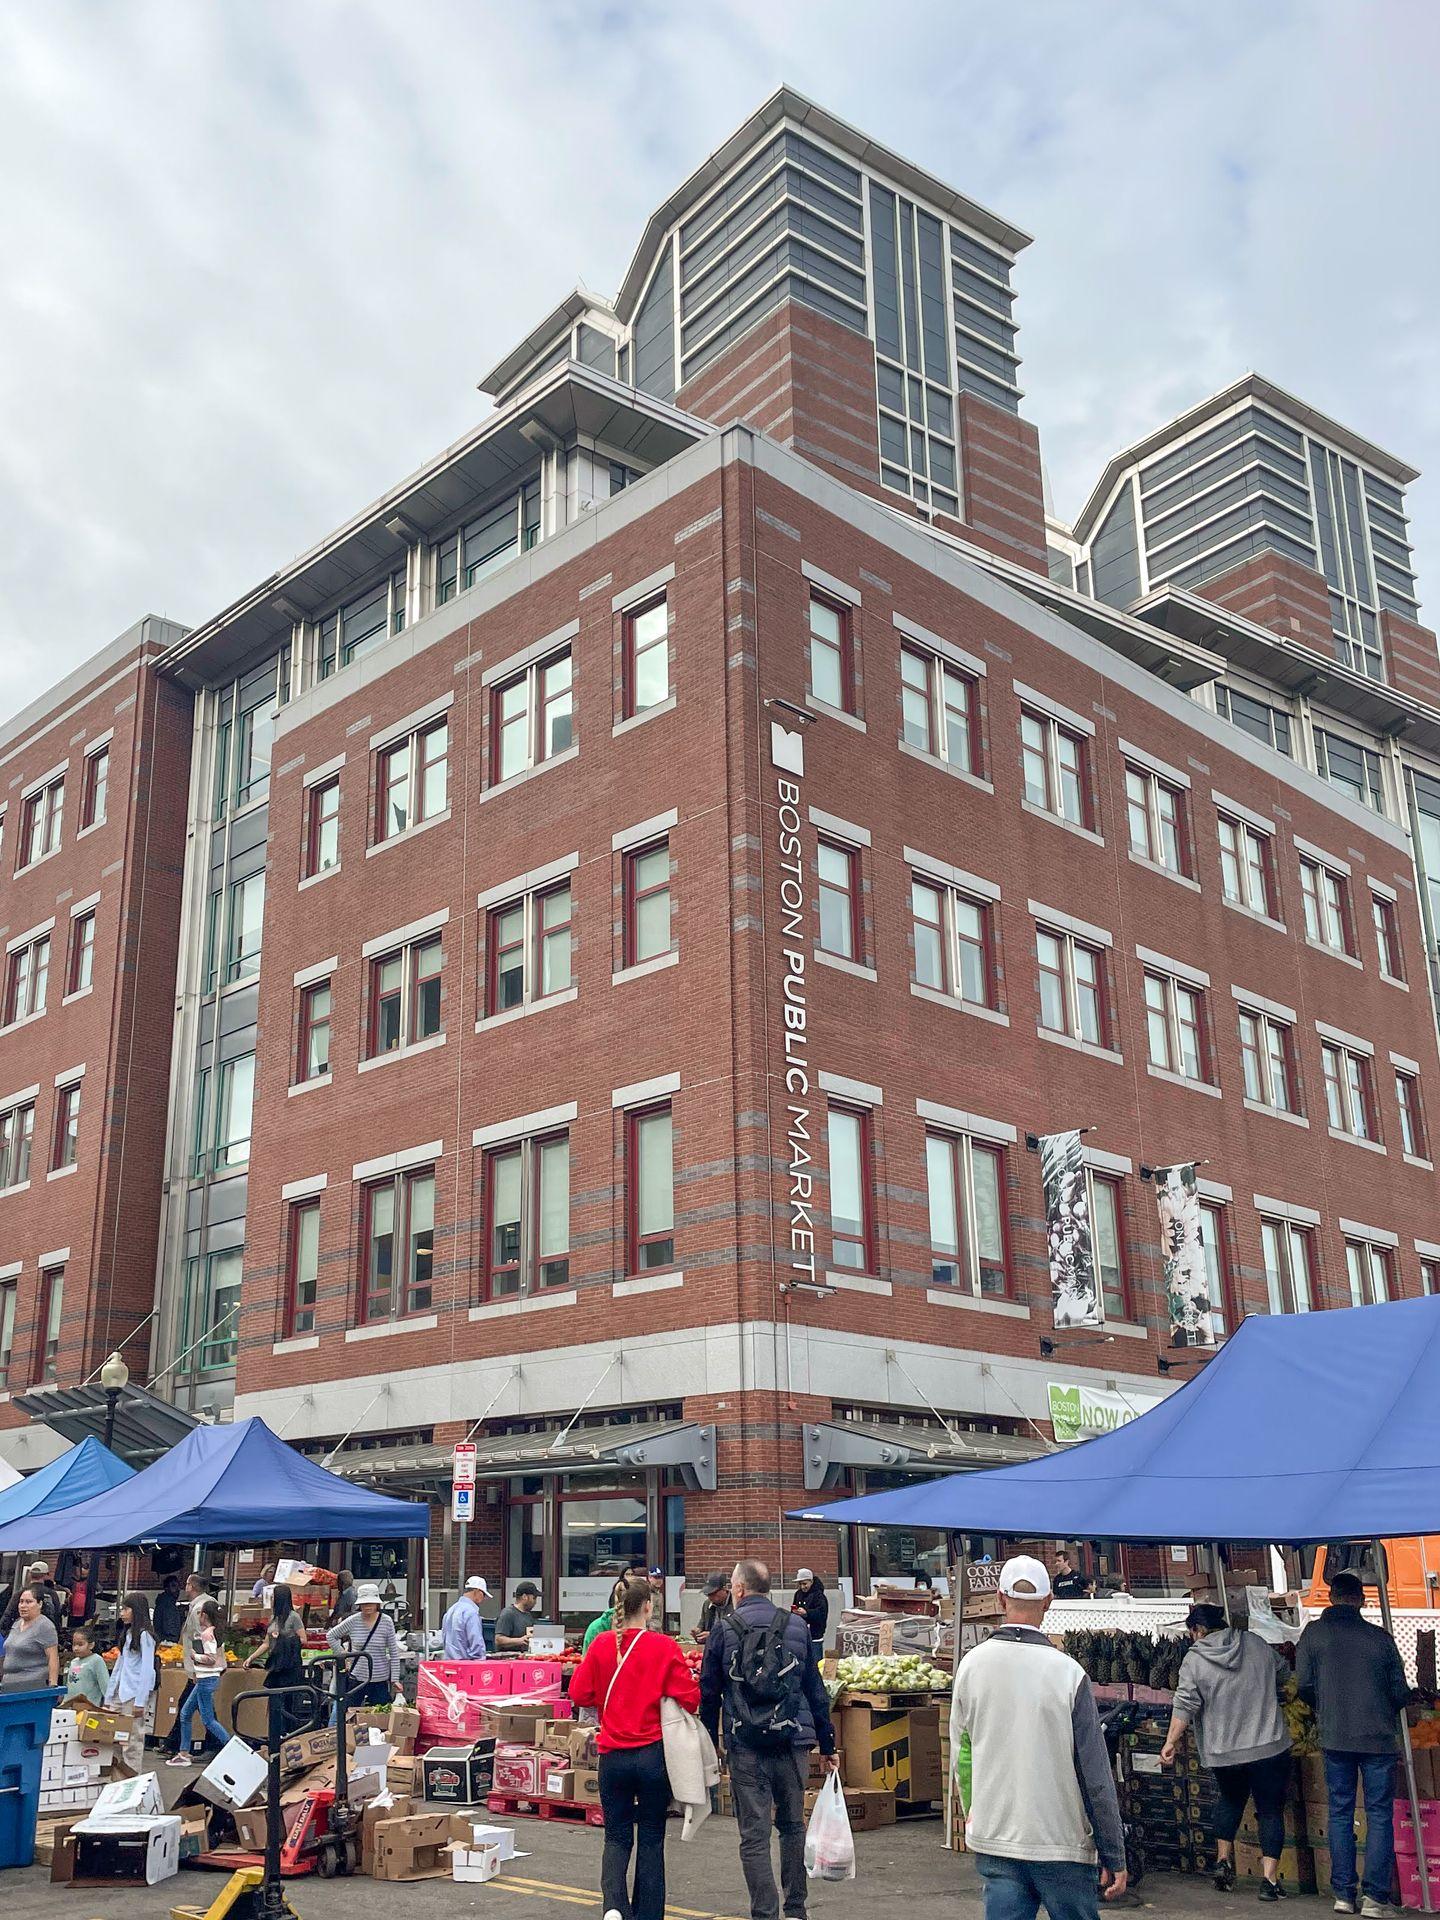 The exterior of the Boston Public Market, a large brick building.